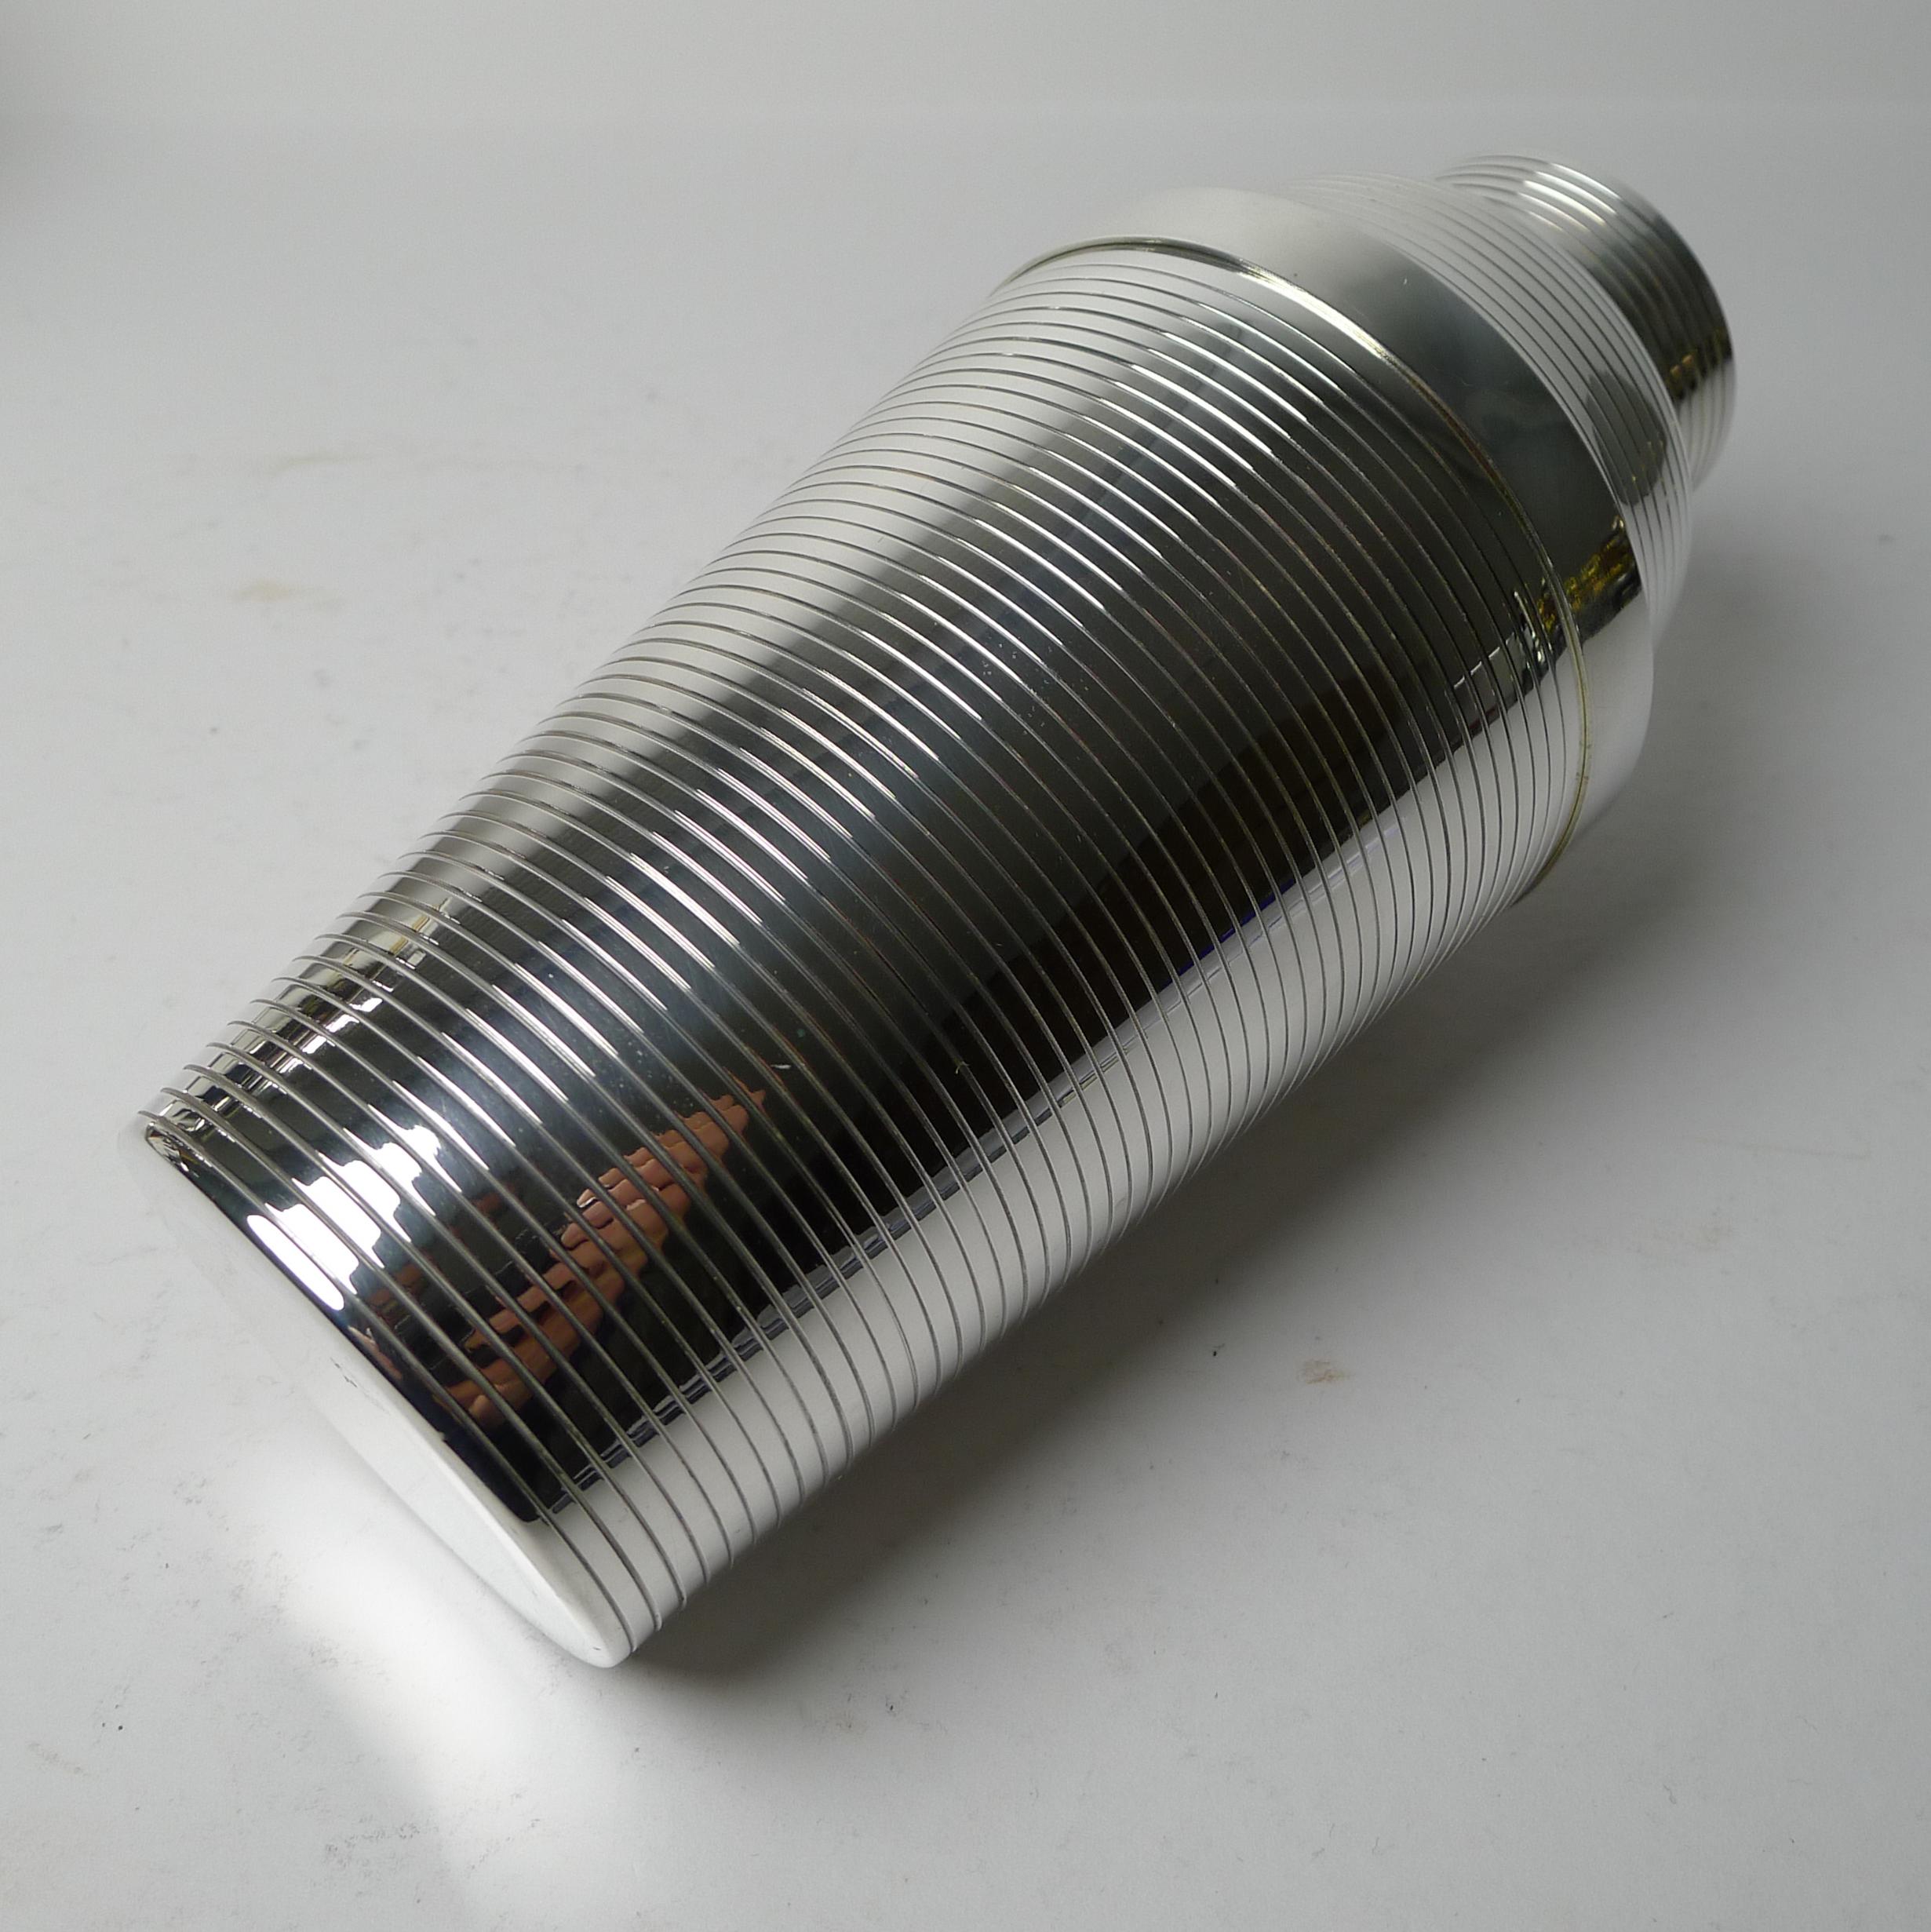 Vintage German Silver Plated Cocktail Shaker by Carl Deffner c.1930's In Good Condition For Sale In Bath, GB